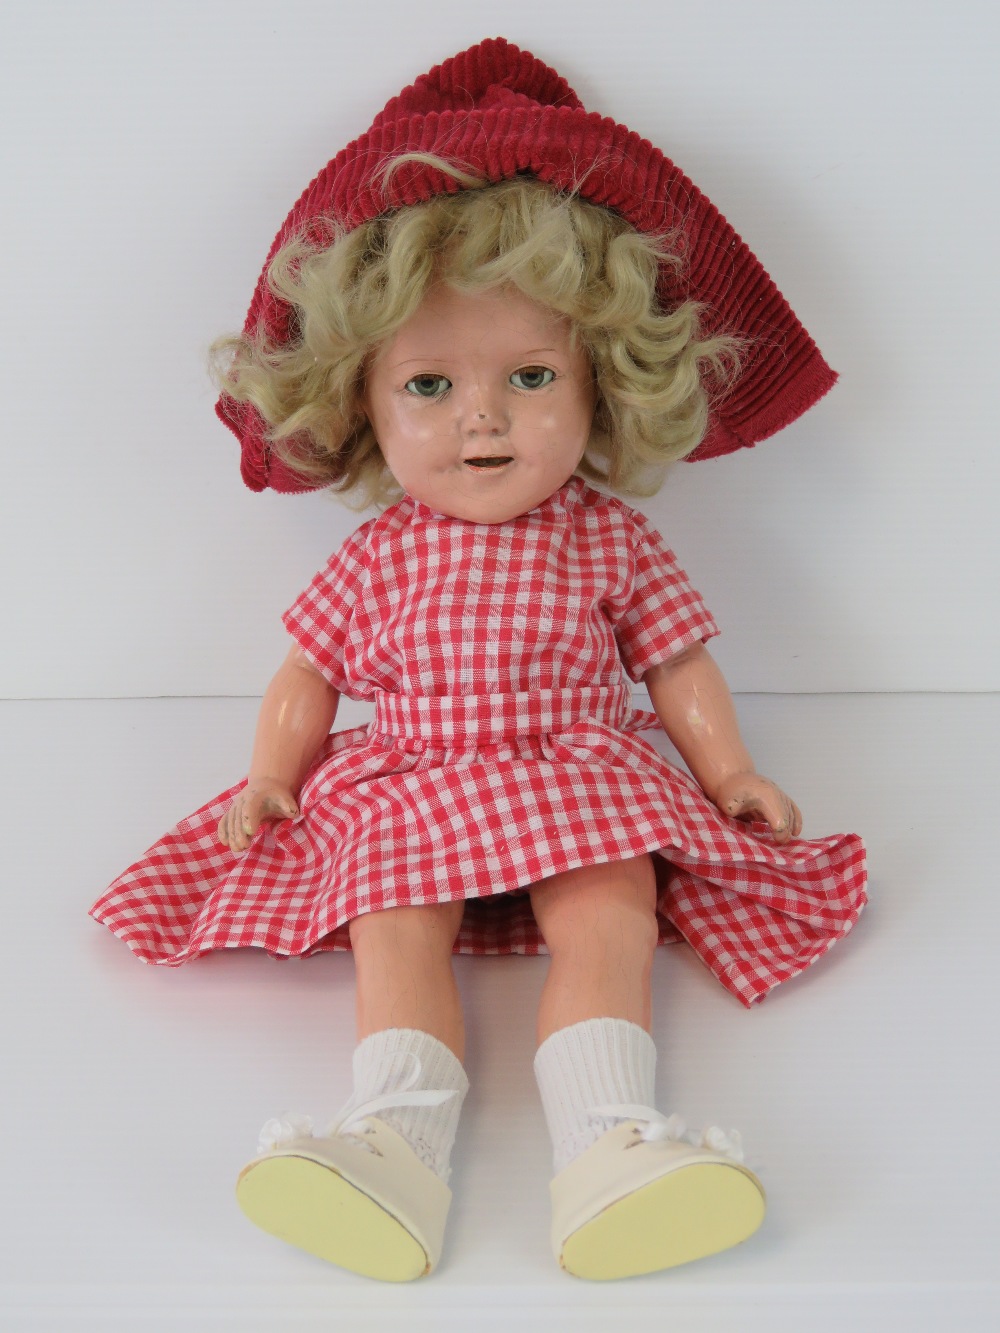 A Shirley Temple doll by Ideal, with sle - Image 2 of 4